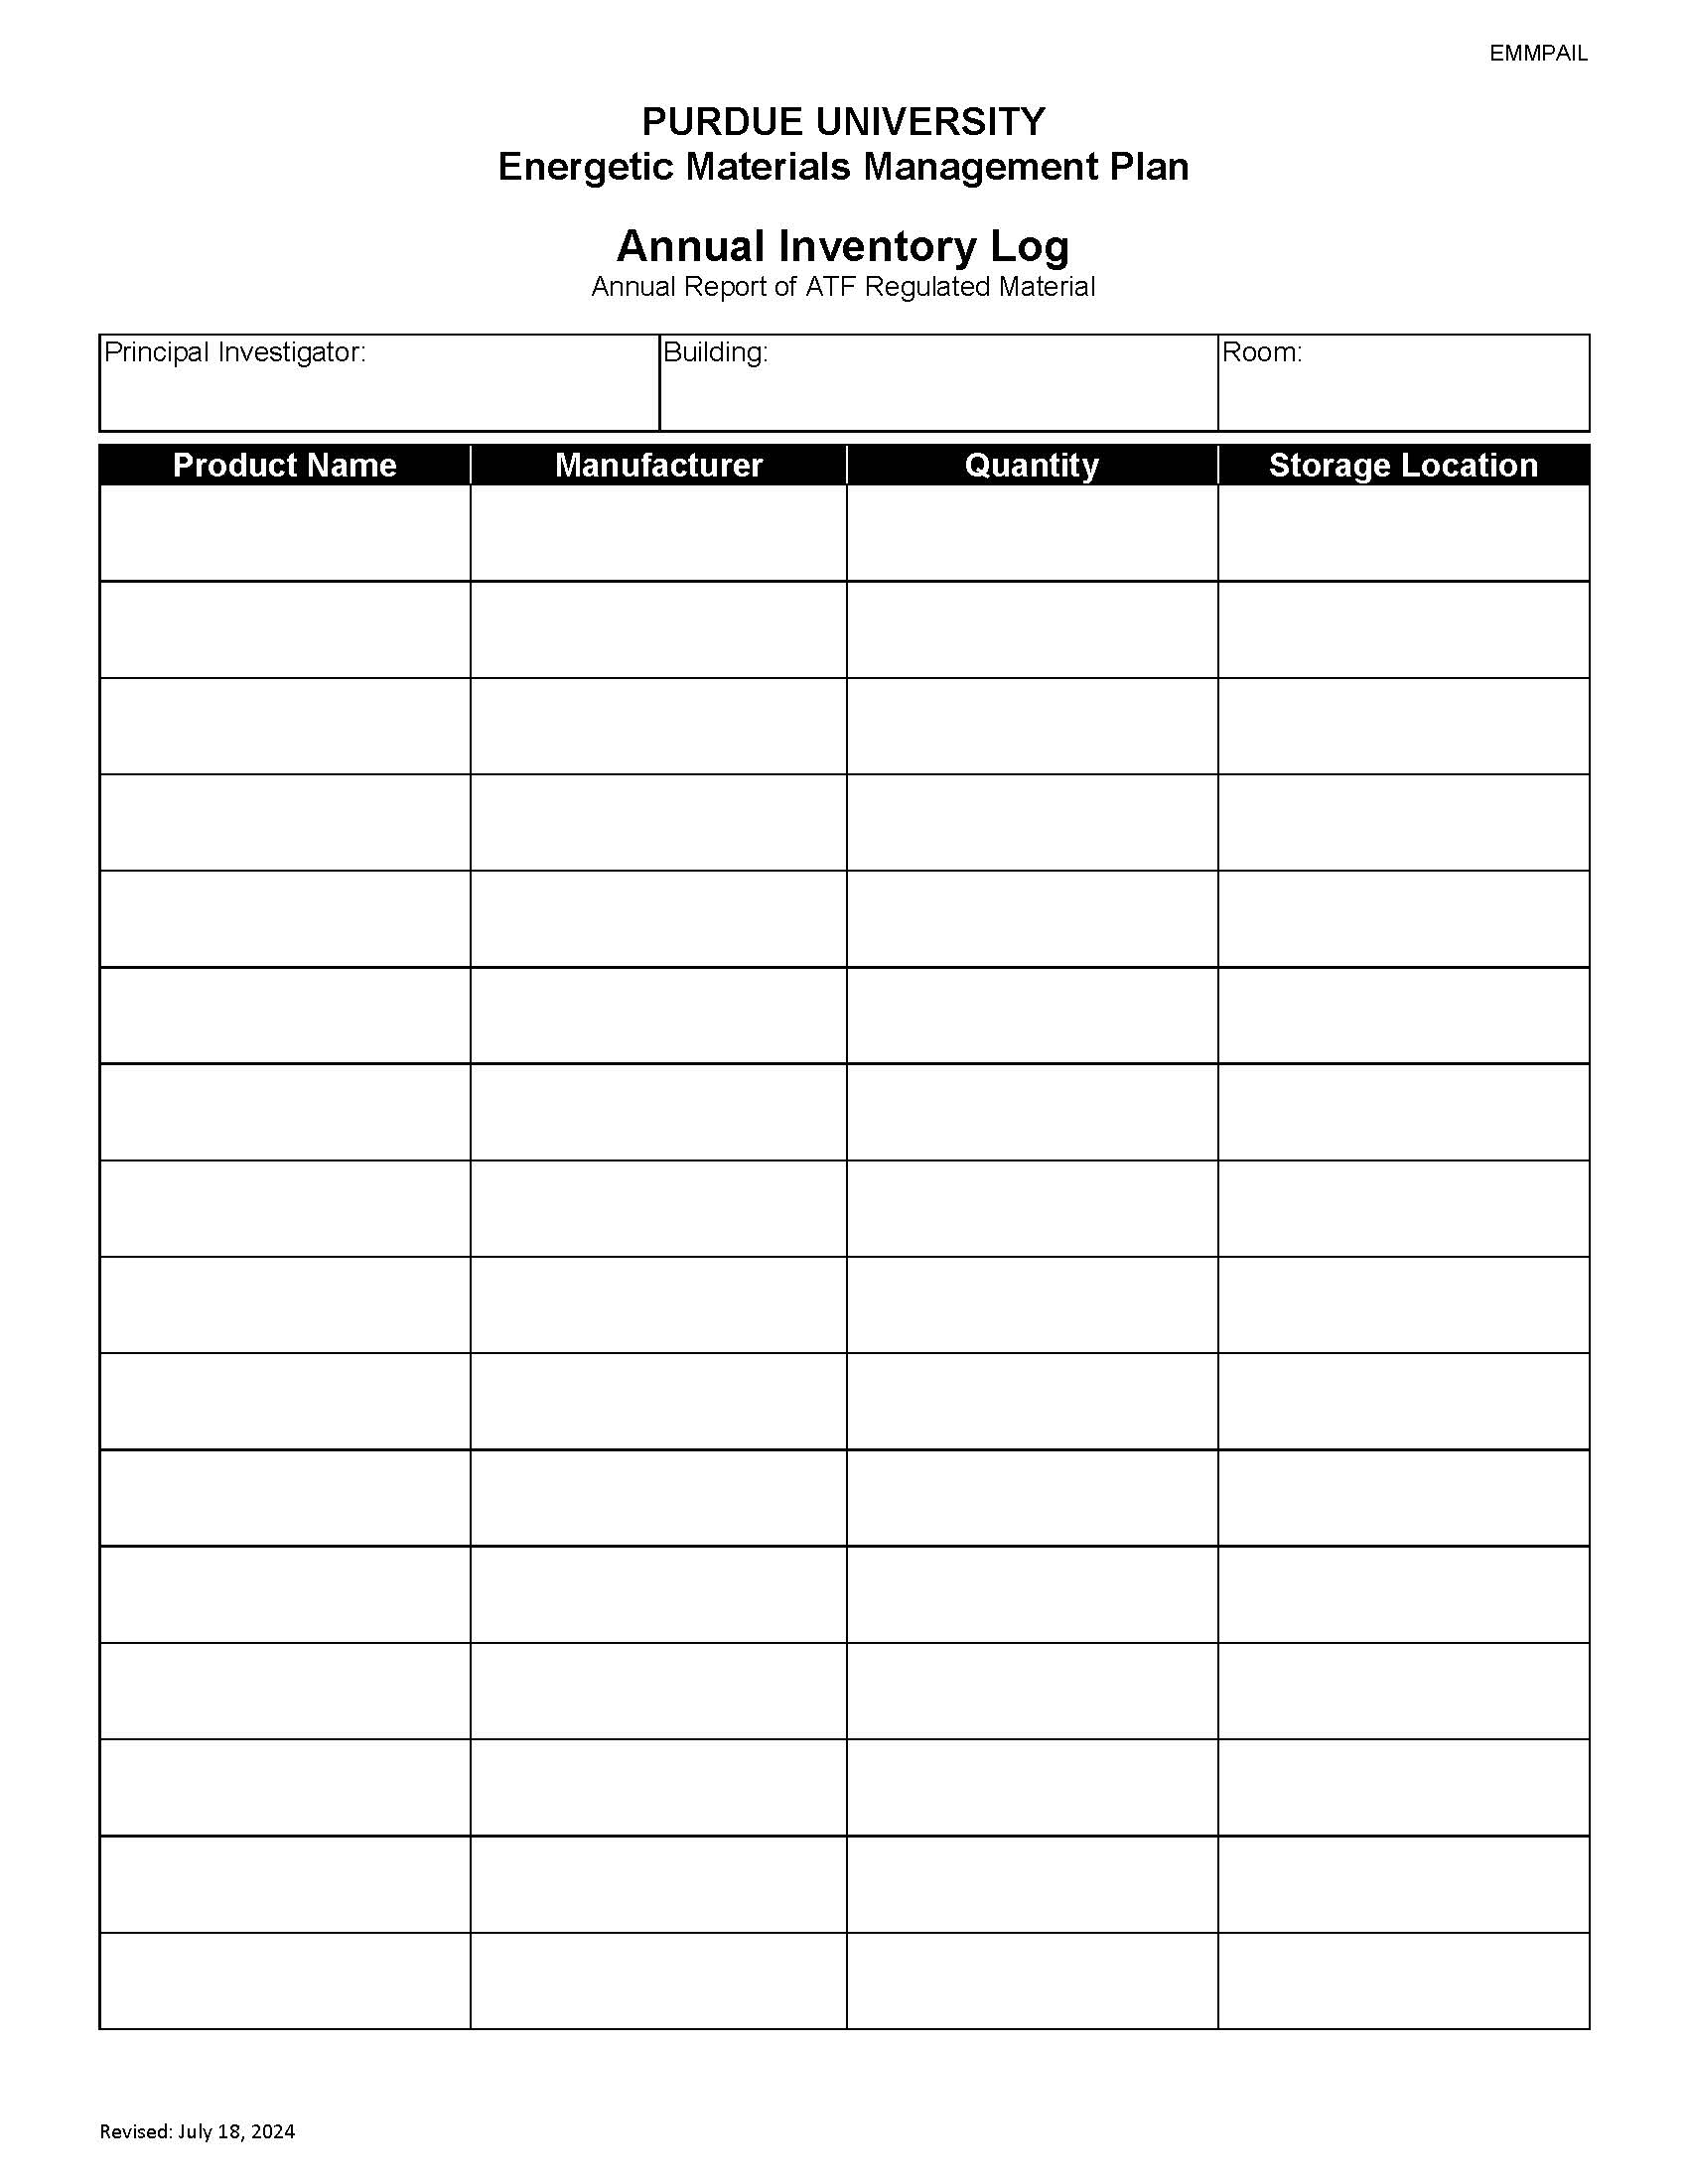 Energetic Materials Management Plan Annual Inventory Log